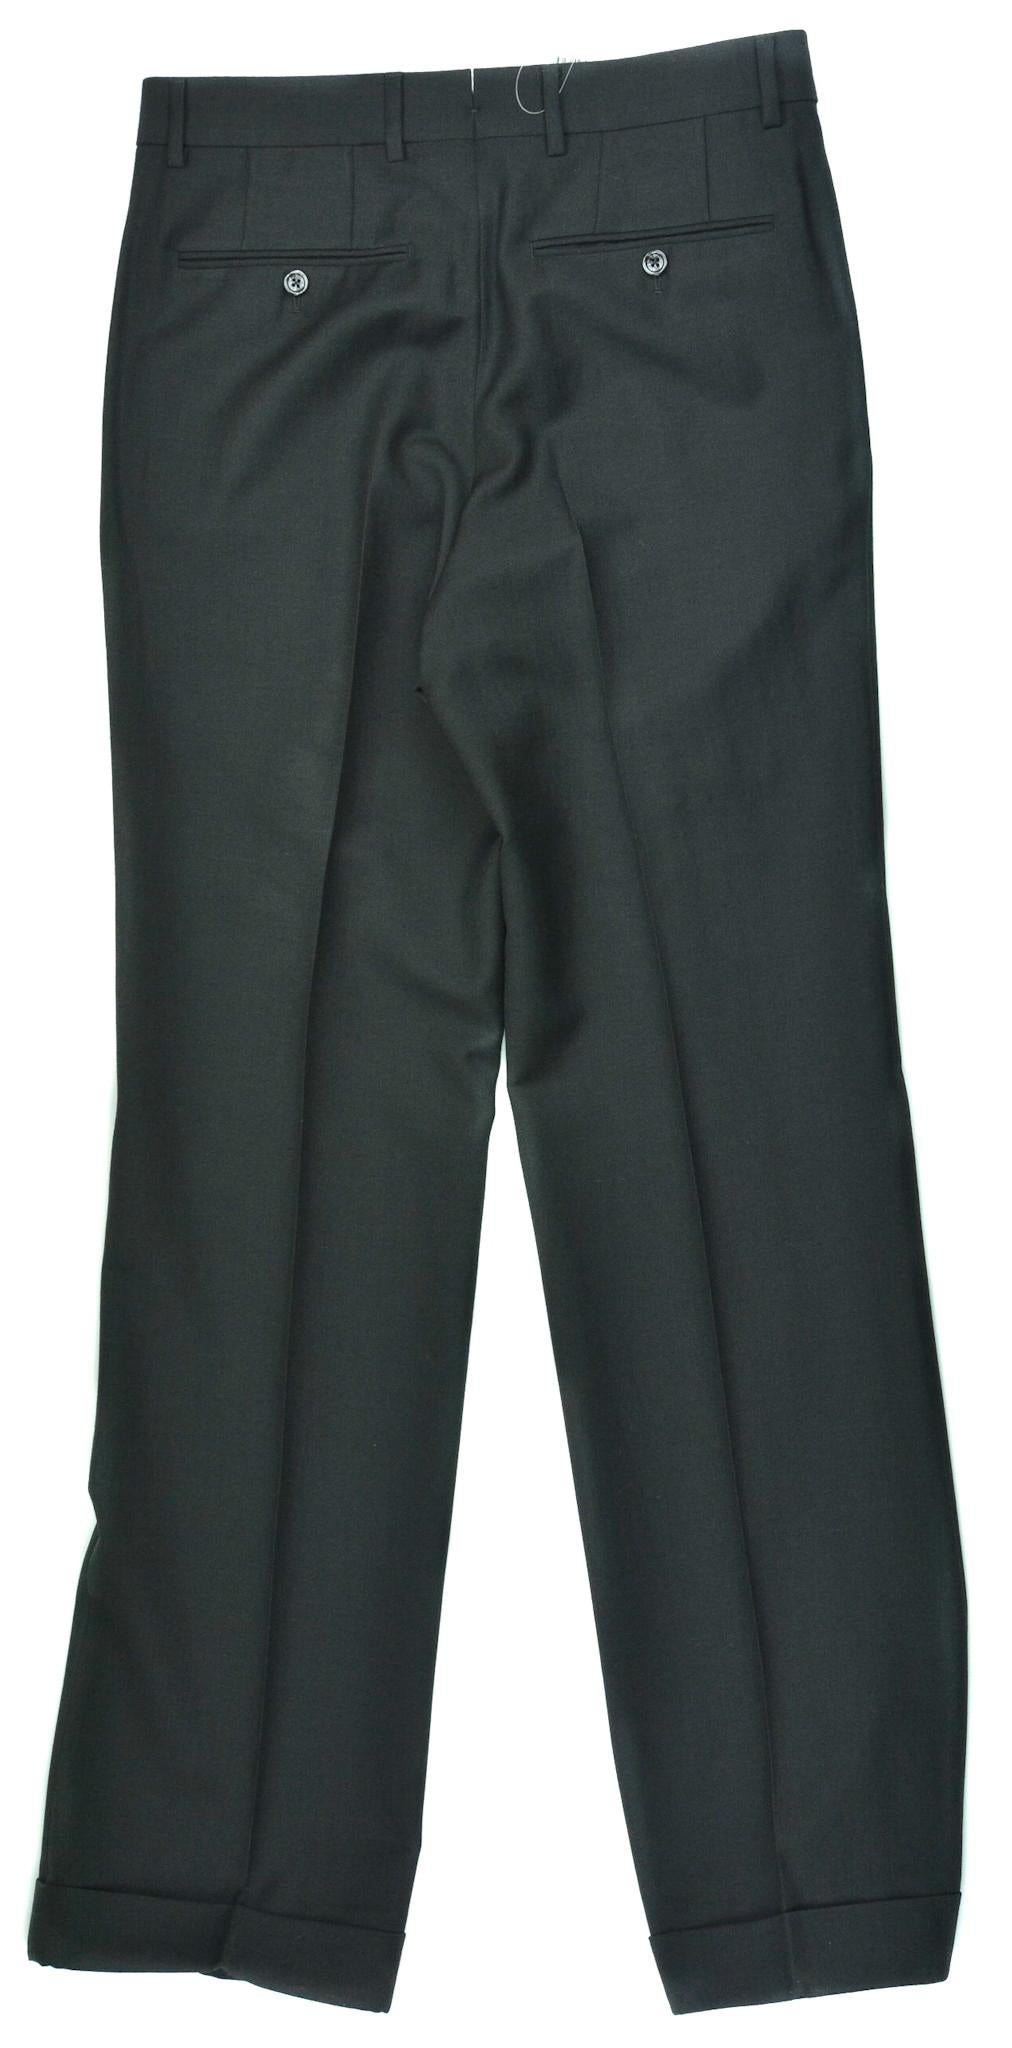 Embrace the idea of modern sophistication in your Tom Ford Trousers. This exquisite pair features a rich twill wool and mohair, straight fit silhouette, and modern classic pleated front face. You can pair these trousers with button down and tonal